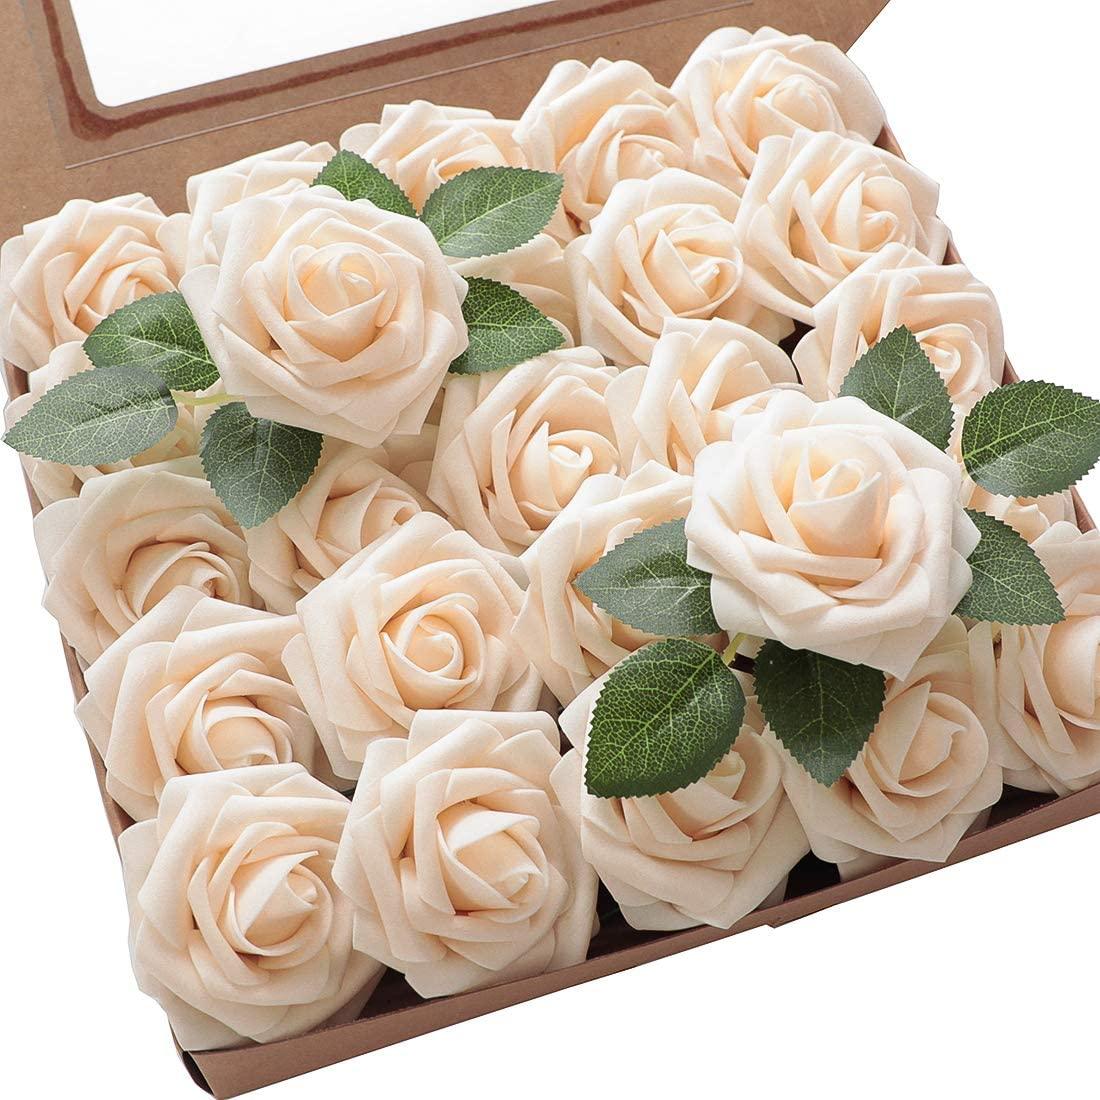 Real Looking Cream Foam Fake Roses with Stems for DIY Wedding Bouquets Bridal Shower Centerpieces Decor - Decotree.co Online Shop